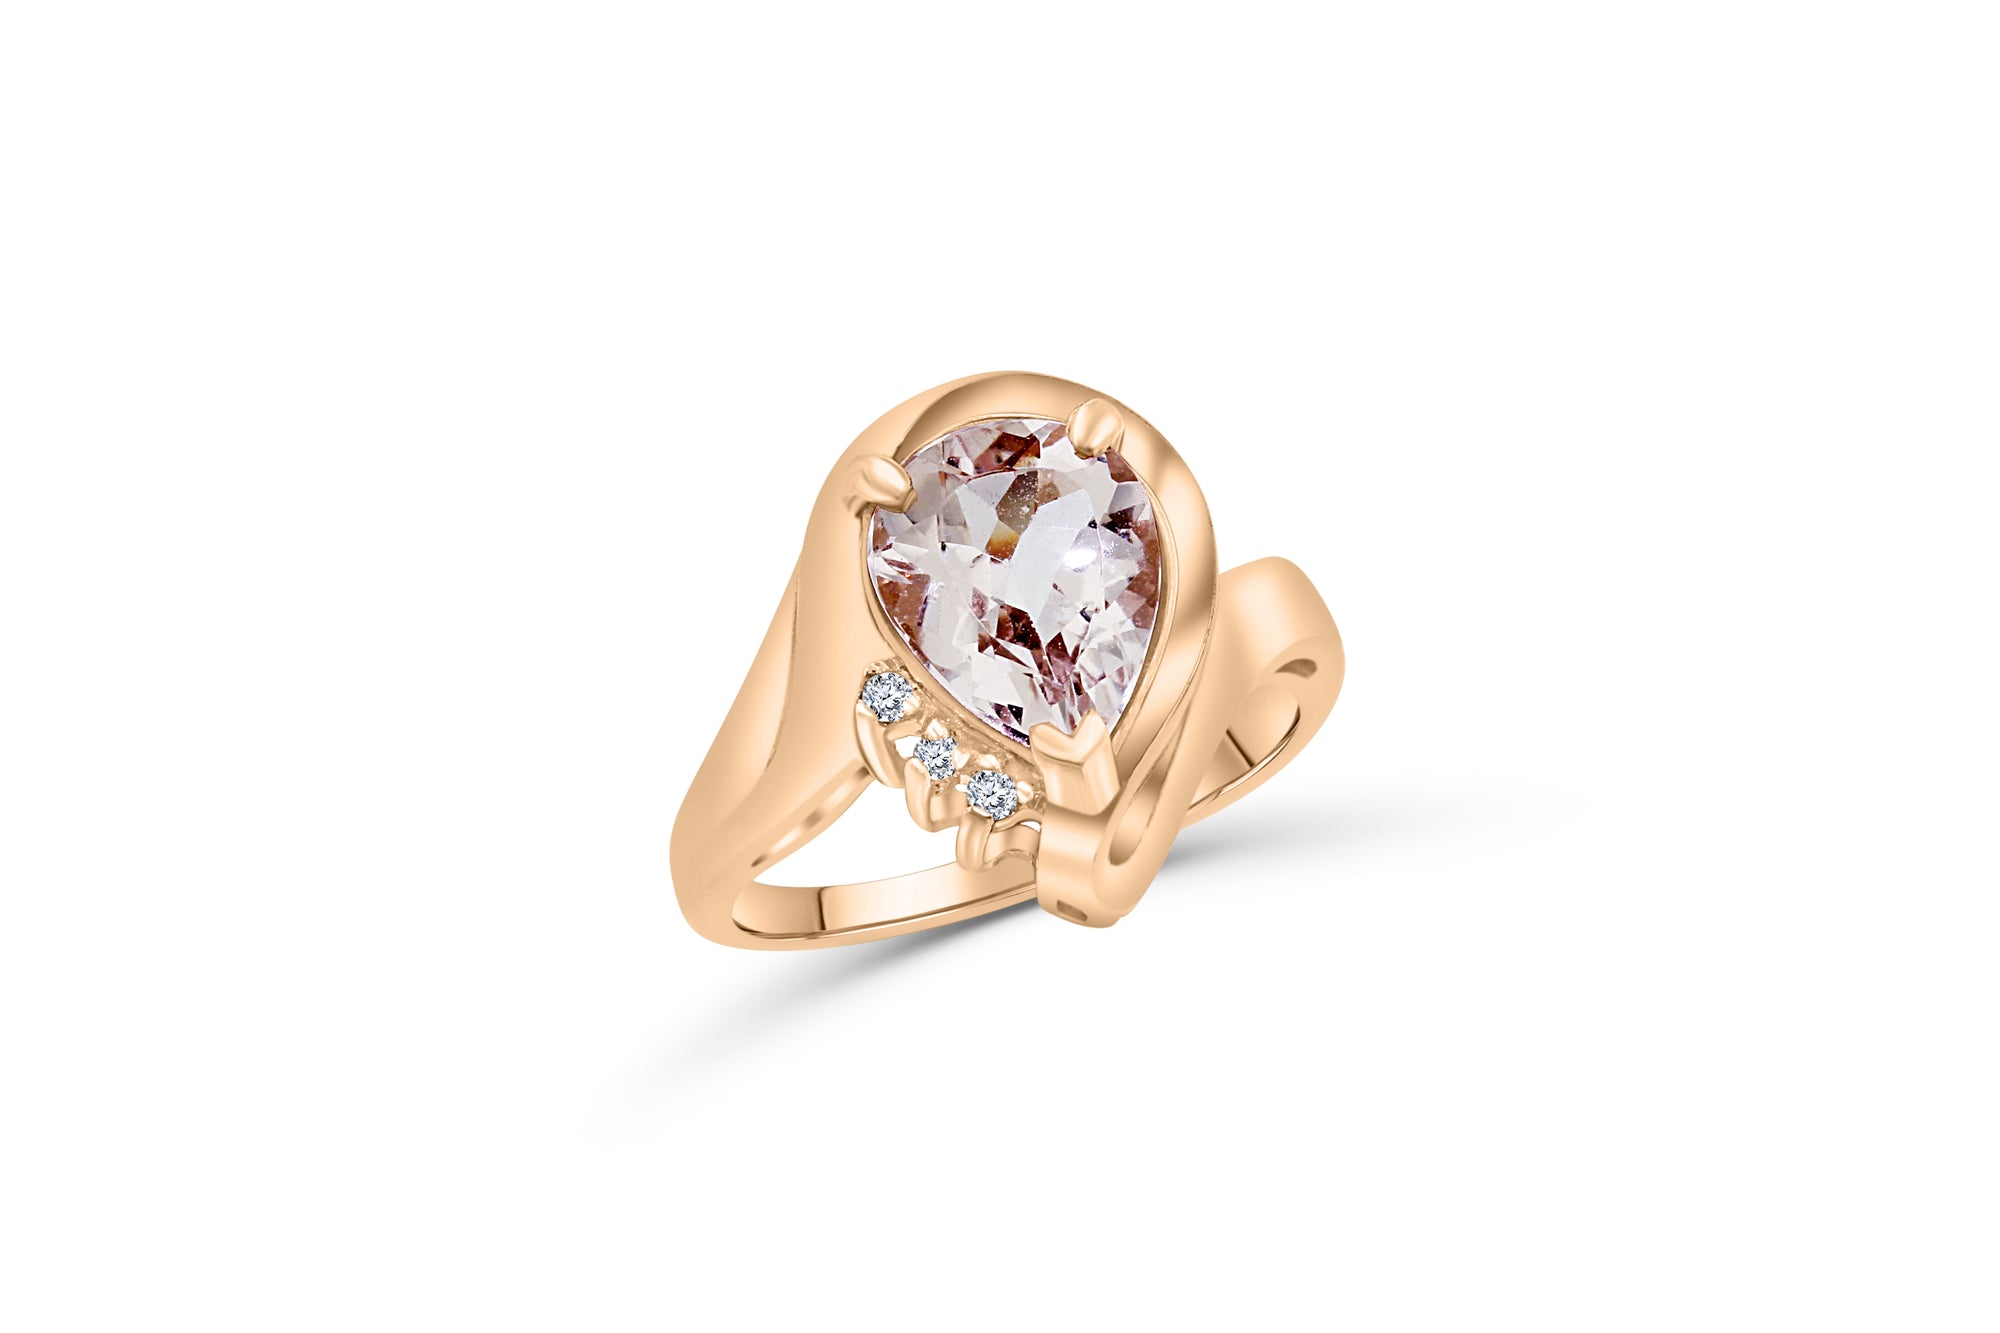 1.86 CT Pear Morganite Diamond Ring 0.03 CT TW Diamonds 14K Rose Gold MGR005 - NorthandSouthJewelry